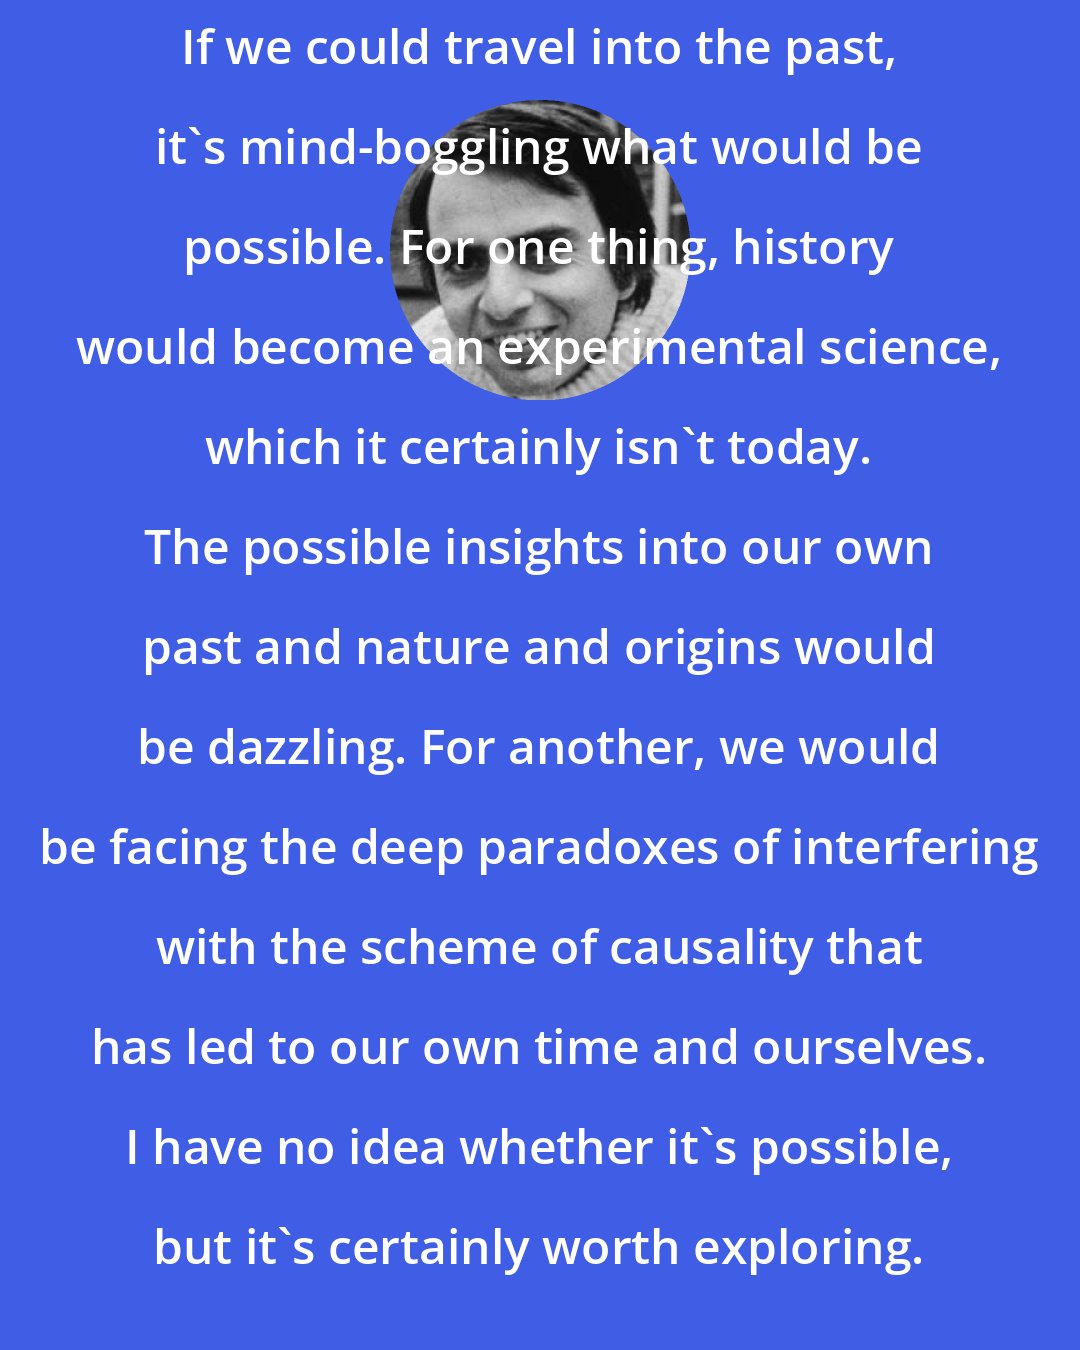 Carl Sagan: If we could travel into the past, it's mind-boggling what would be possible. For one thing, history would become an experimental science, which it certainly isn't today. The possible insights into our own past and nature and origins would be dazzling. For another, we would be facing the deep paradoxes of interfering with the scheme of causality that has led to our own time and ourselves. I have no idea whether it's possible, but it's certainly worth exploring.